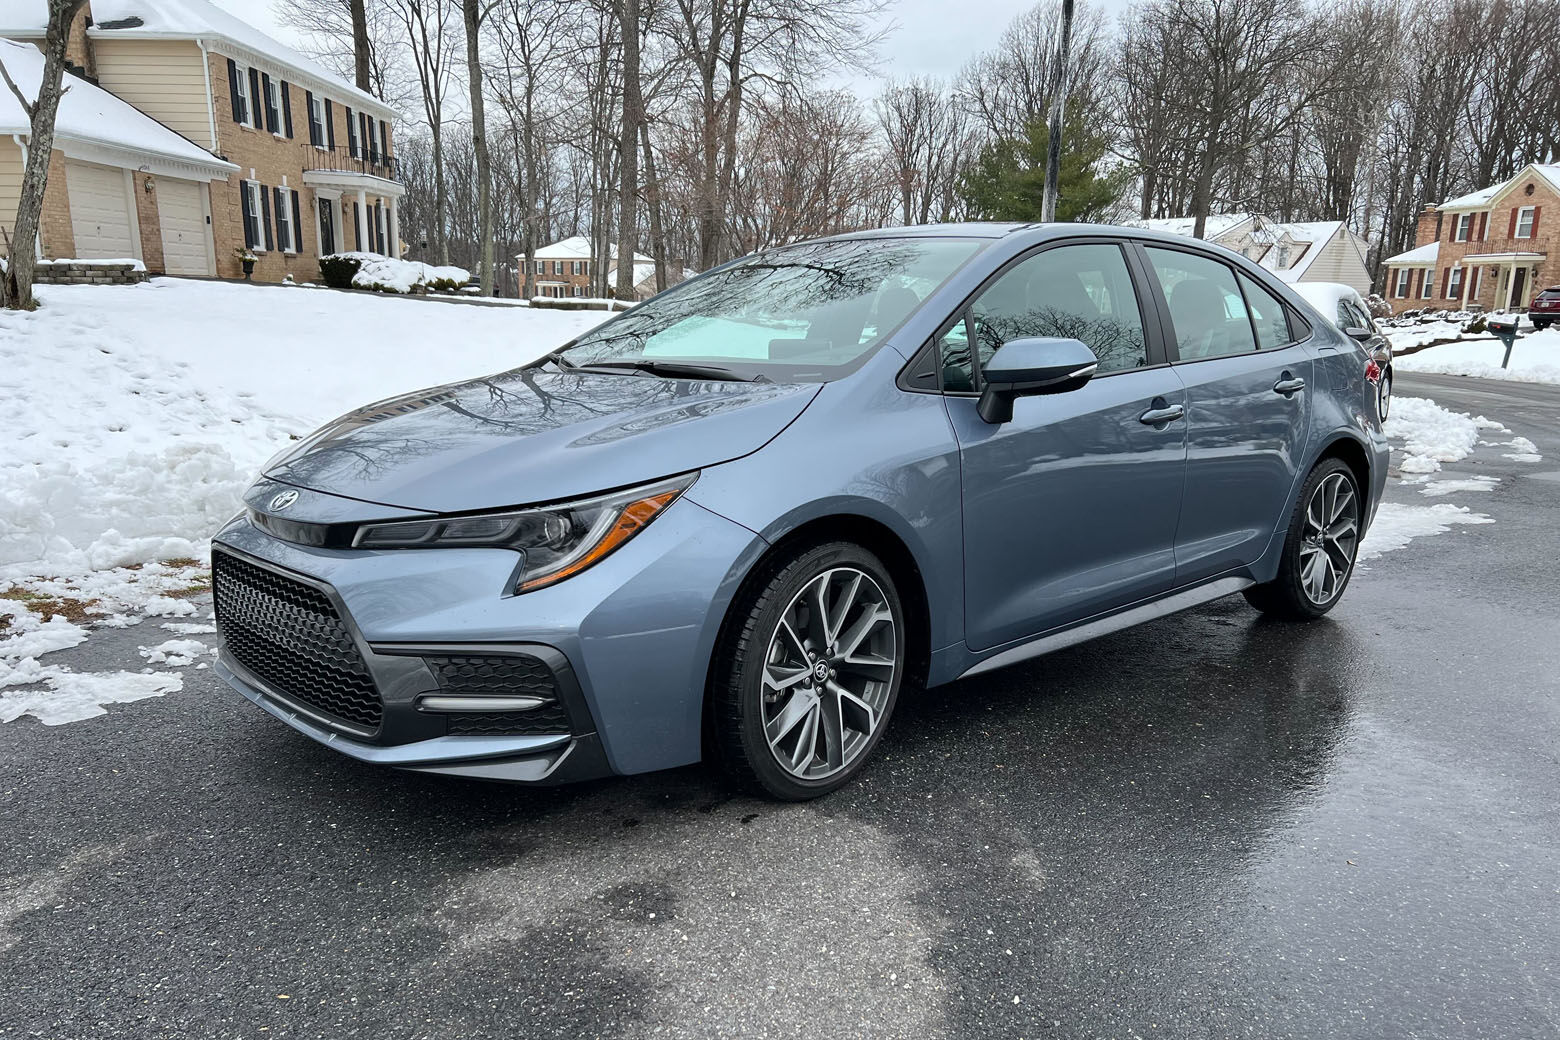 2020 Toyota Corolla XSE Hatchback Interior Review: Can Small Still